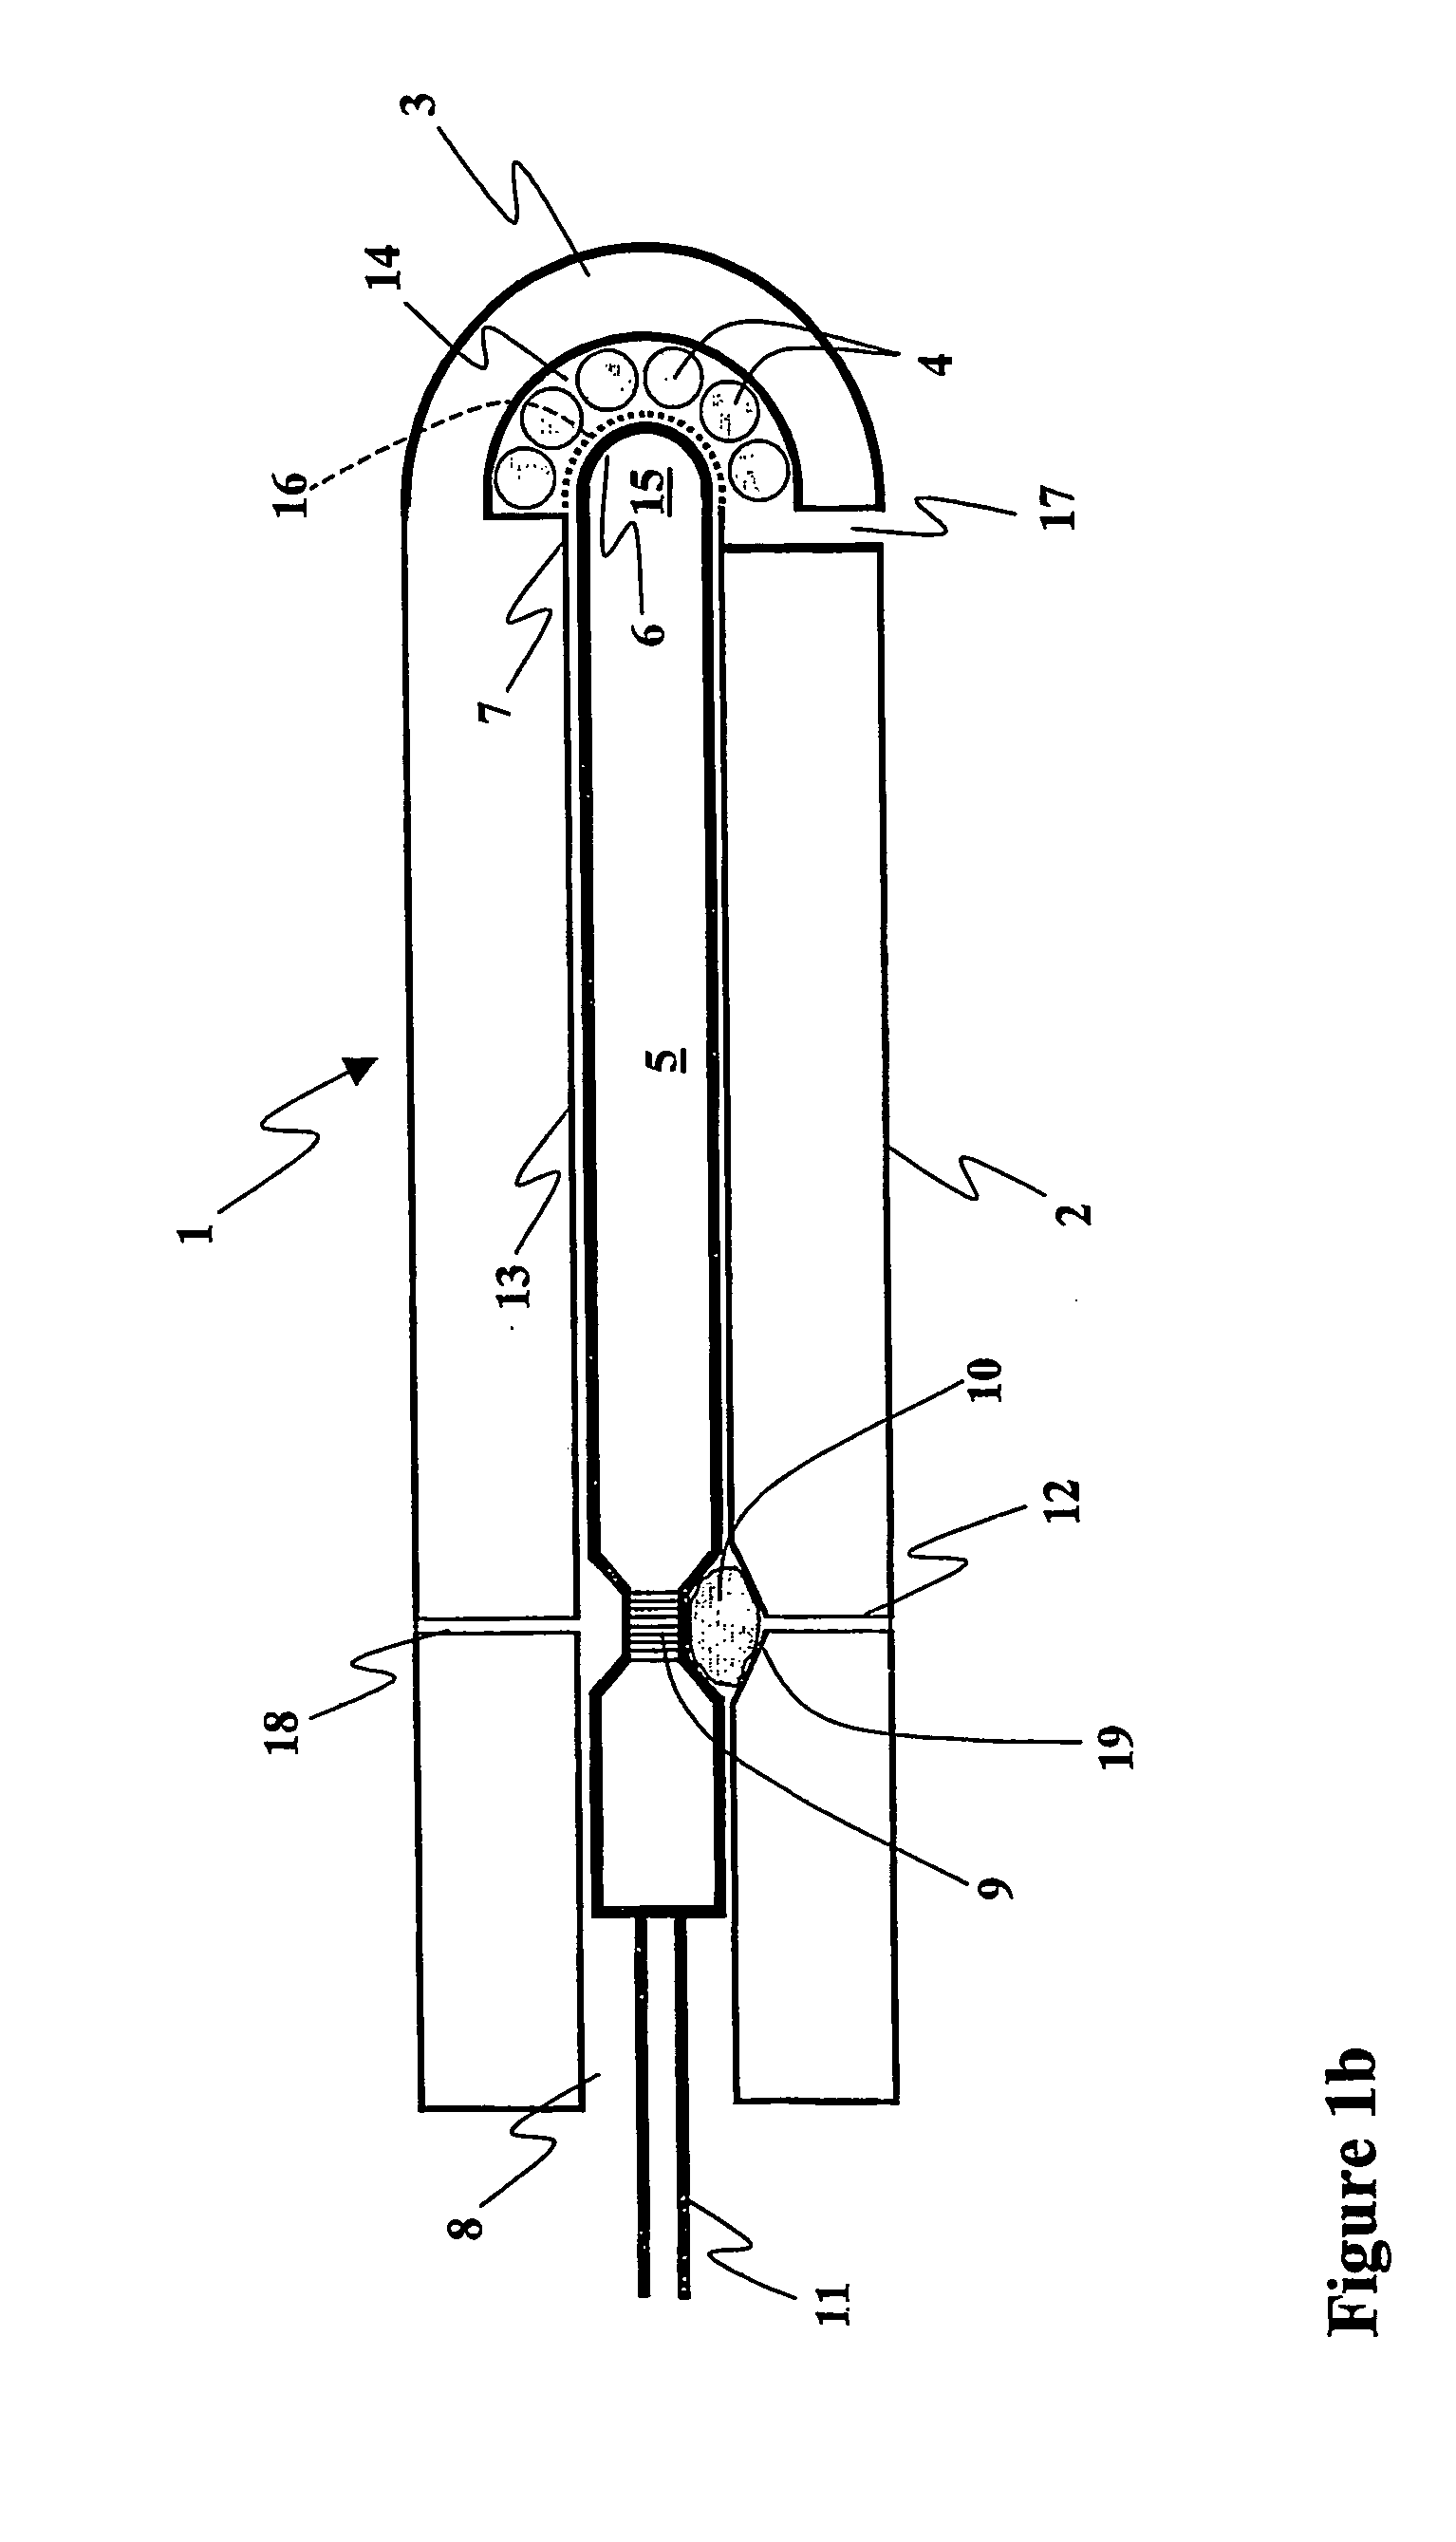 Connector block for shock tubes and method of securing a detonator therein